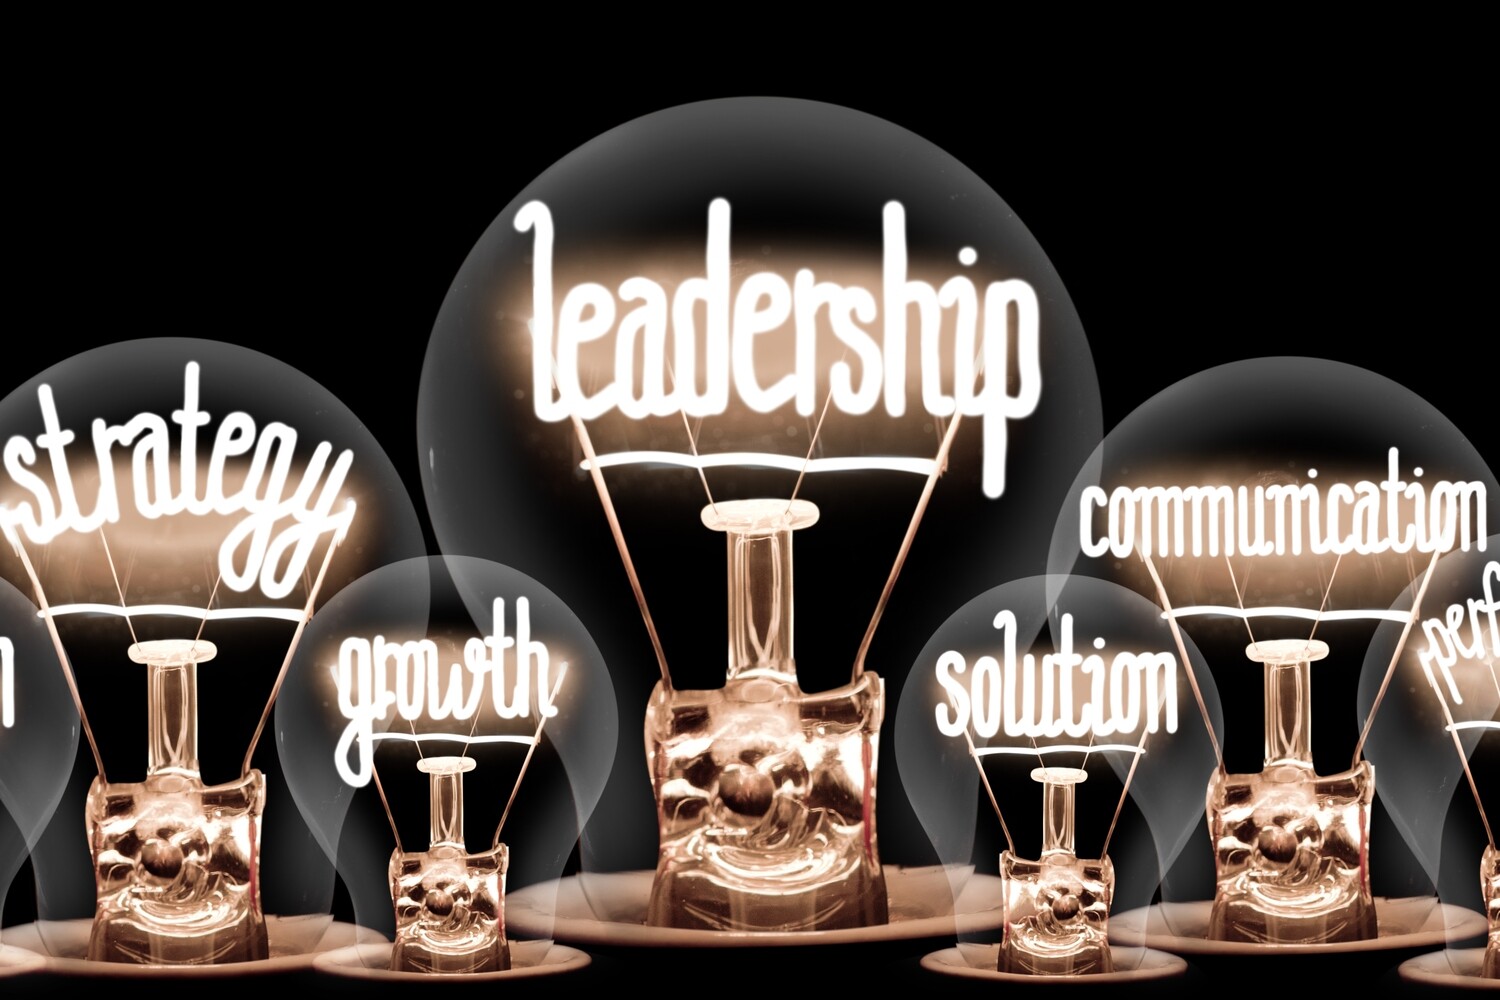 Managing Teams with Servant Leadership – 1 Day, 7 PDUs